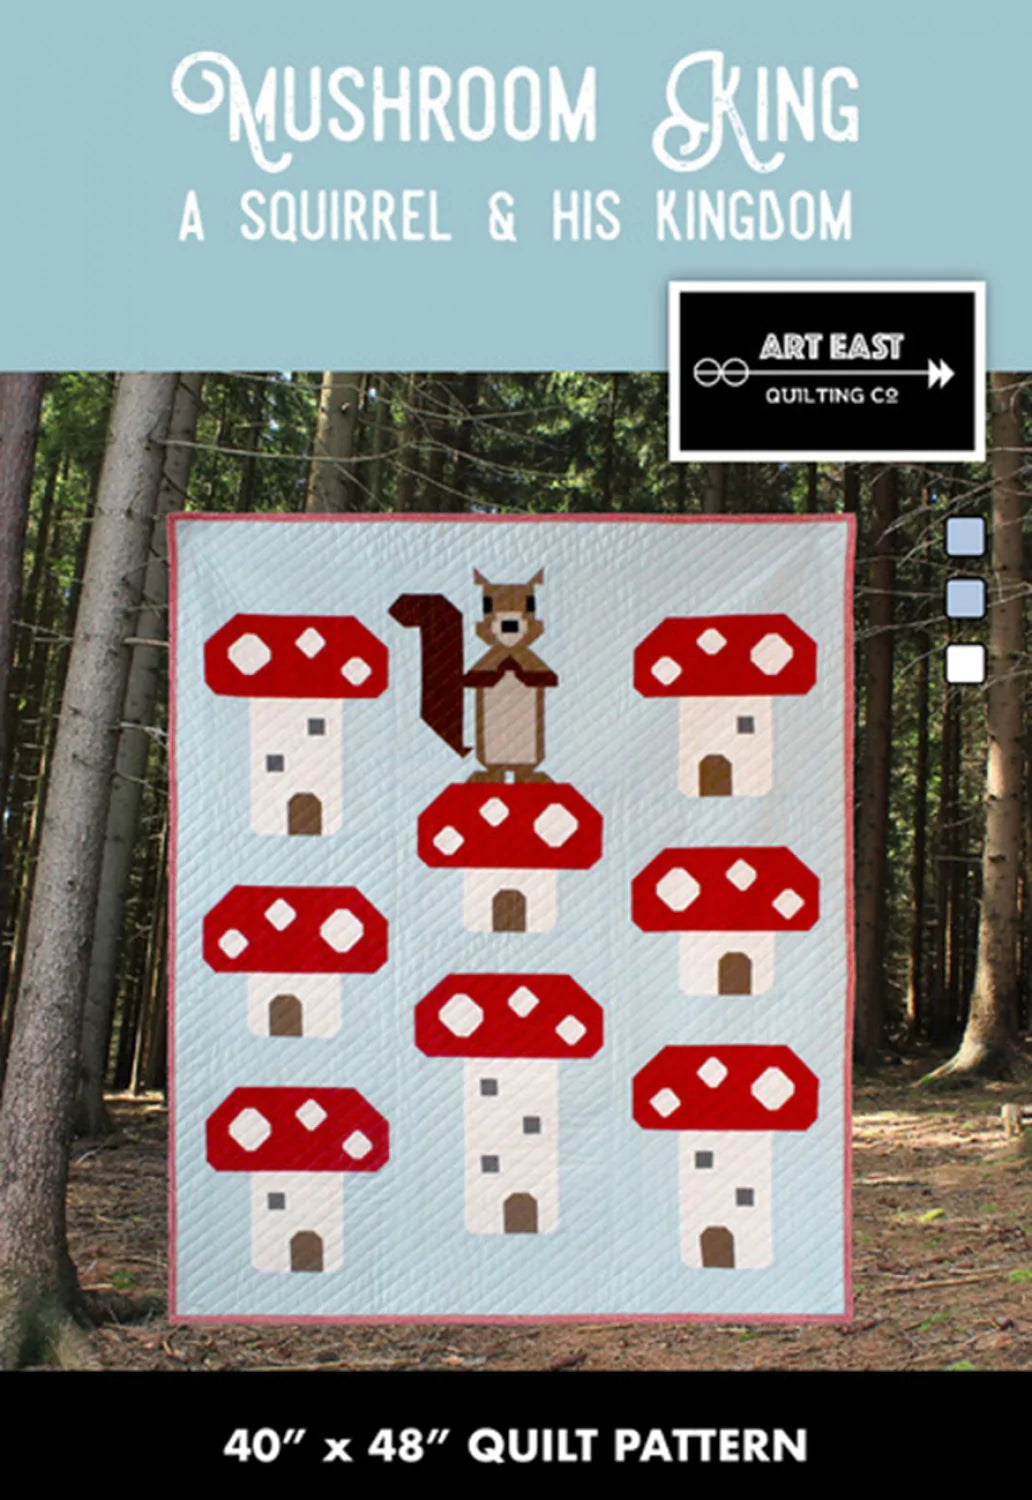 Mushroom King - A Squirrel & His Kingdom by Art East Quilting Co